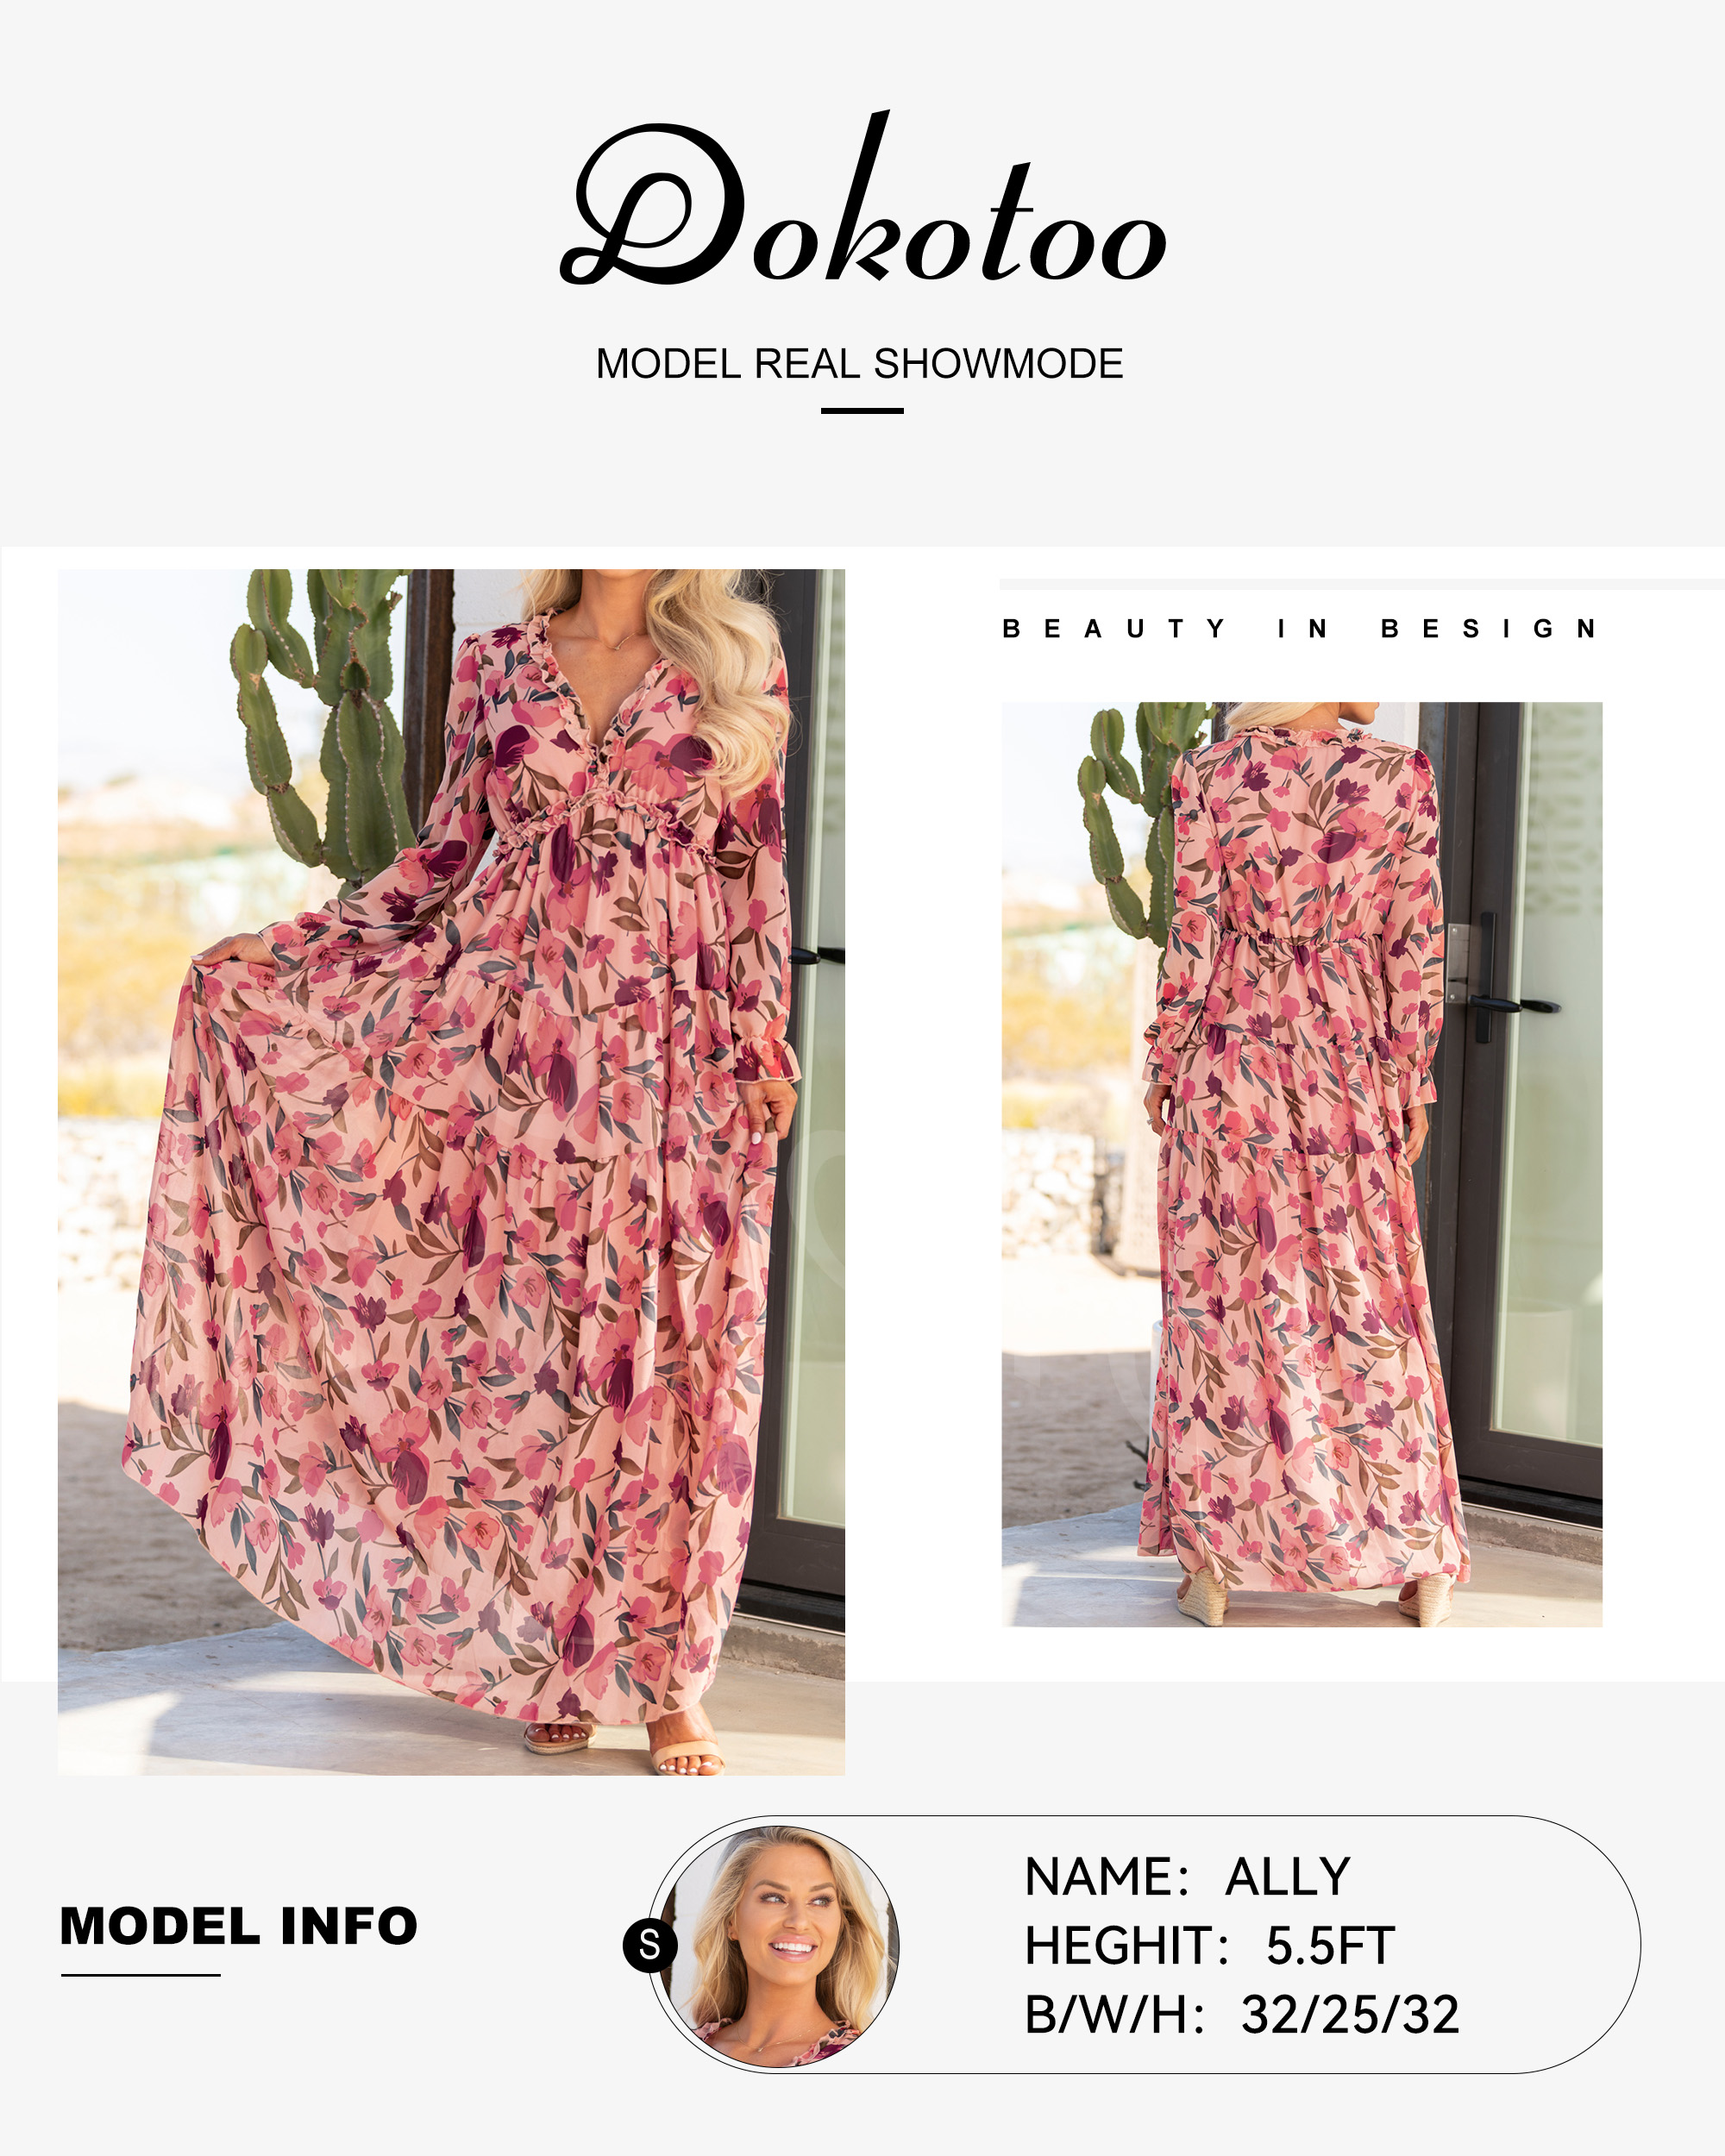 Dokotoo Women's Red Floral Maxi Dresses Casual Deep V Neck Long Sleeve Evening Dress Cocktail Party Dress for Women, US 8-10(M) - image 5 of 8